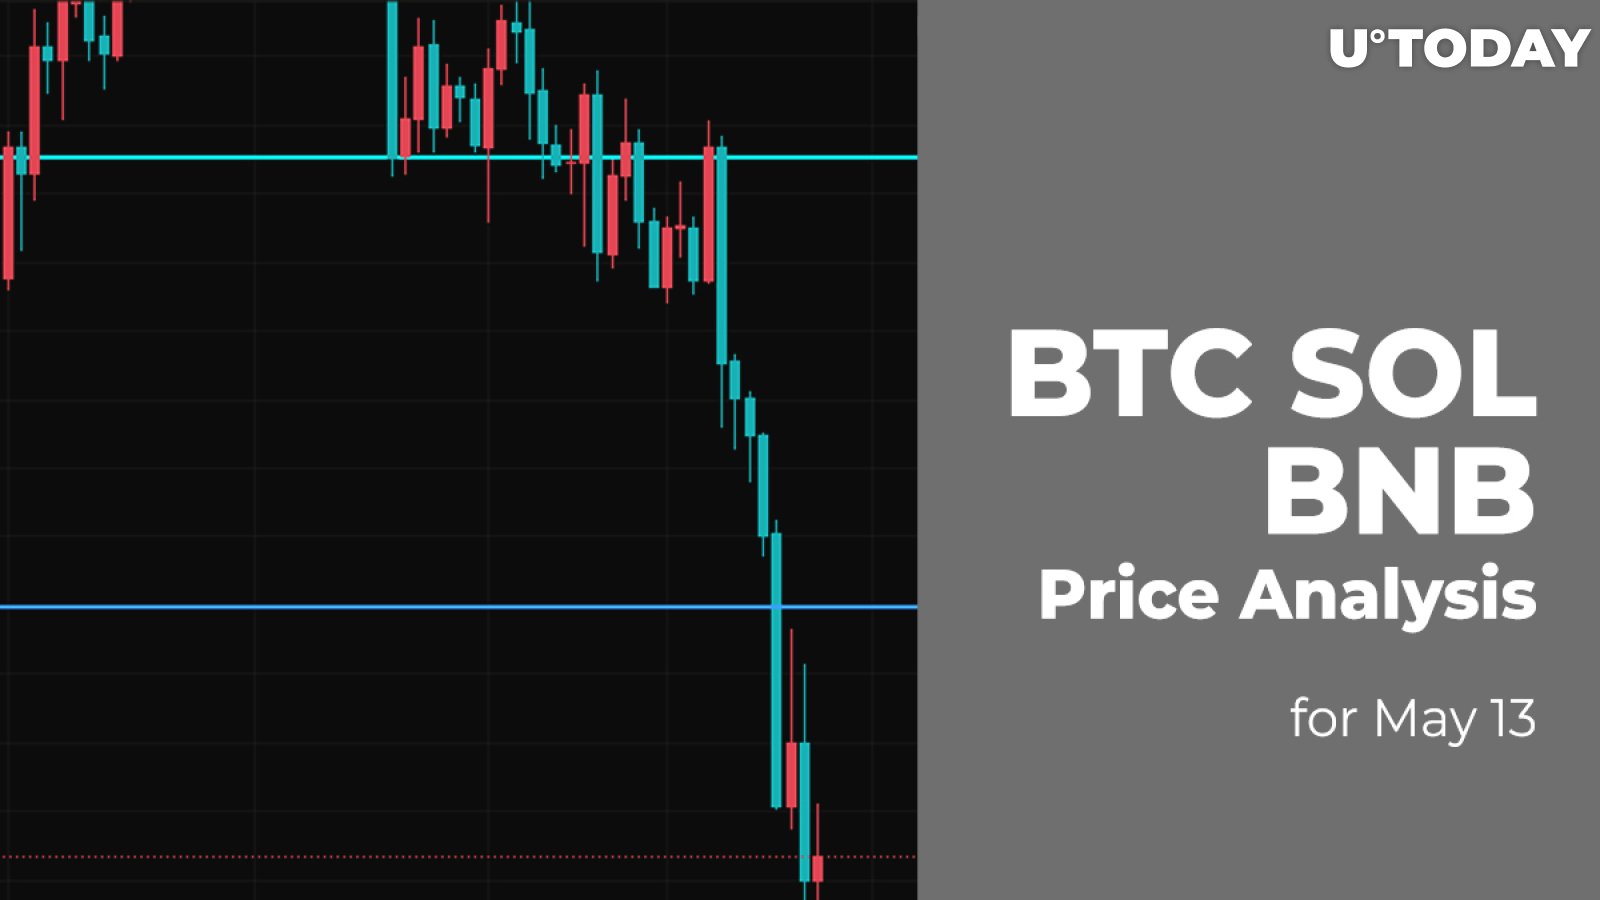 BTC, SOL and BNB Price Analysis for May 13